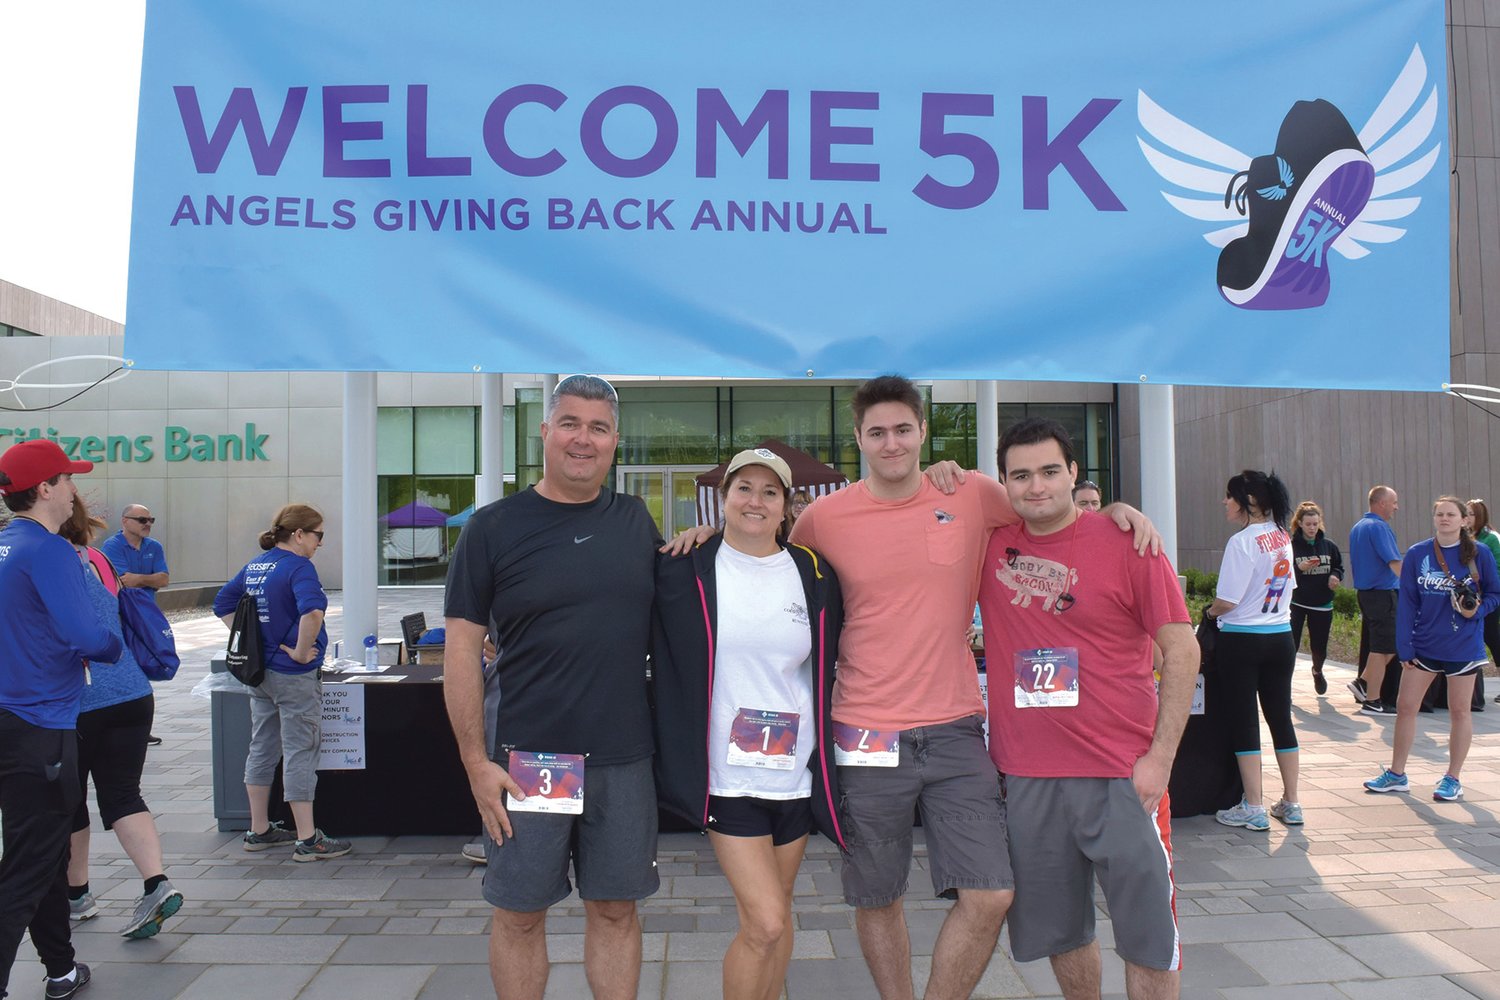 FAMILY BUSINESS: From left to right, Andy Delli Carpini, CEO, Sandy Delli Carpini, Owner/Chief Marketing Officer (CMO), and their children Michael and Nicholas Delli Carpini, pose for a family photo at the inaugural Angels Giving Back 5k event in 2019.